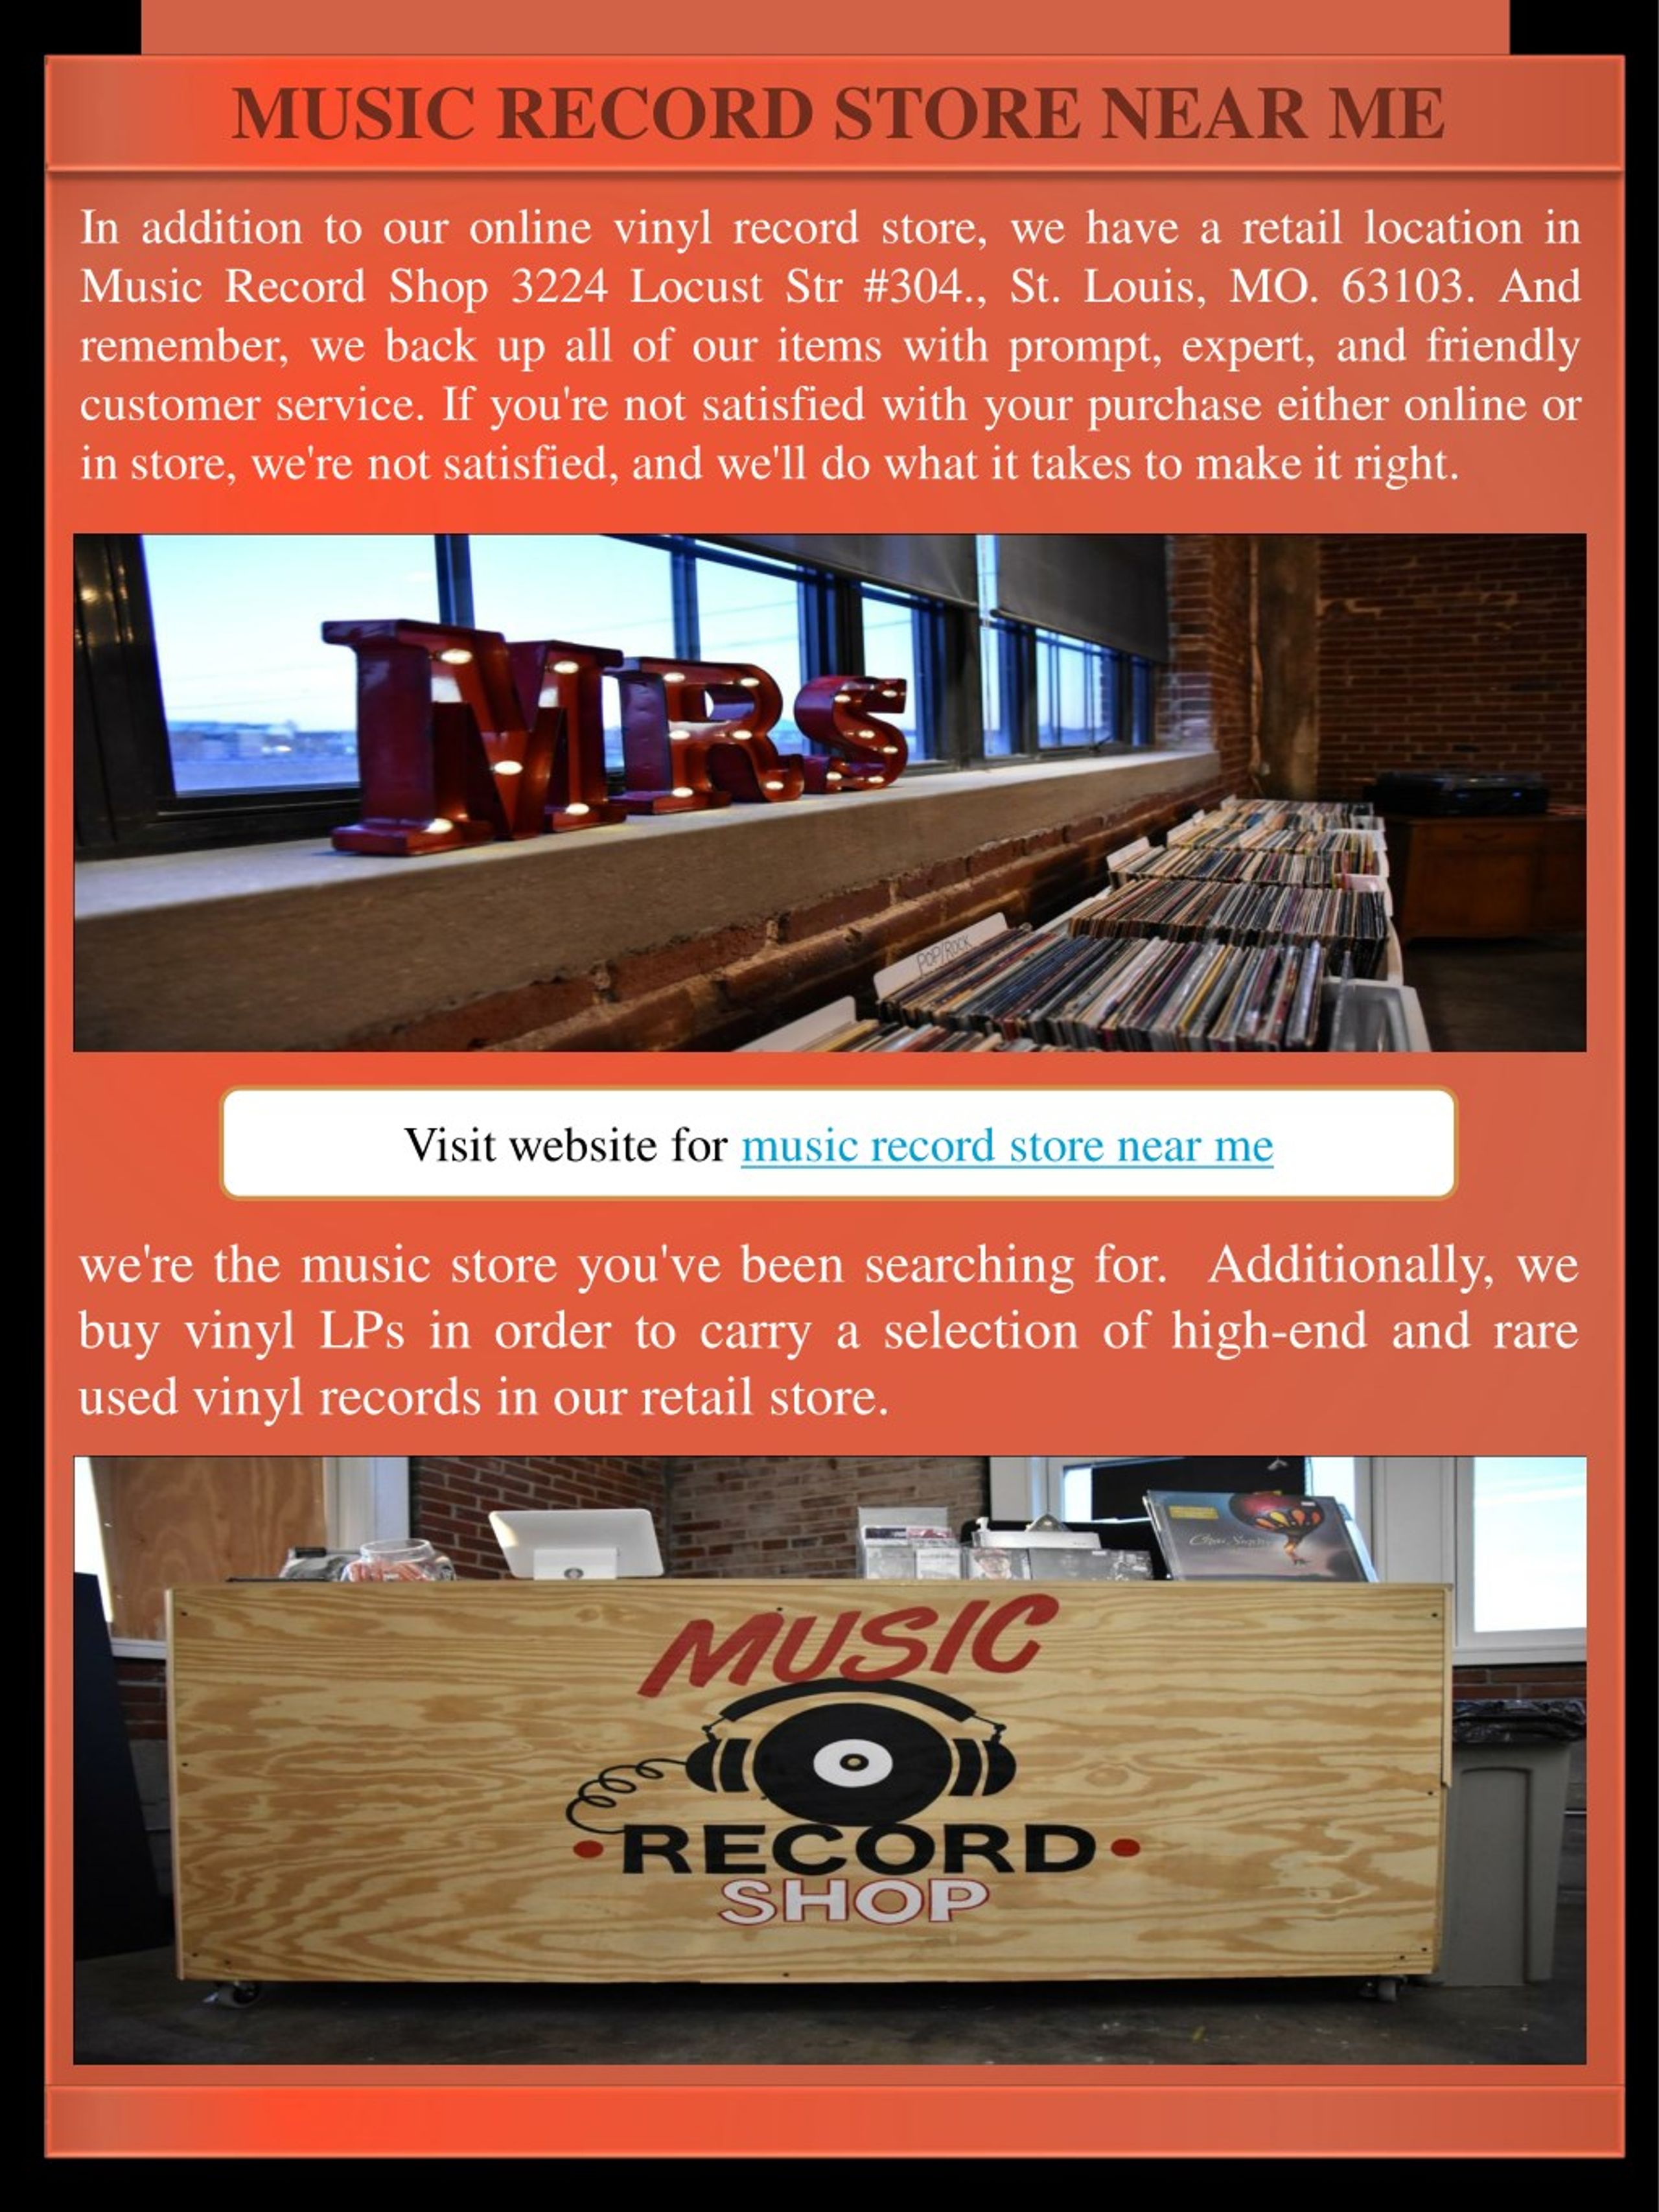 PPT - Music Record Store Near Me PowerPoint Presentation ...